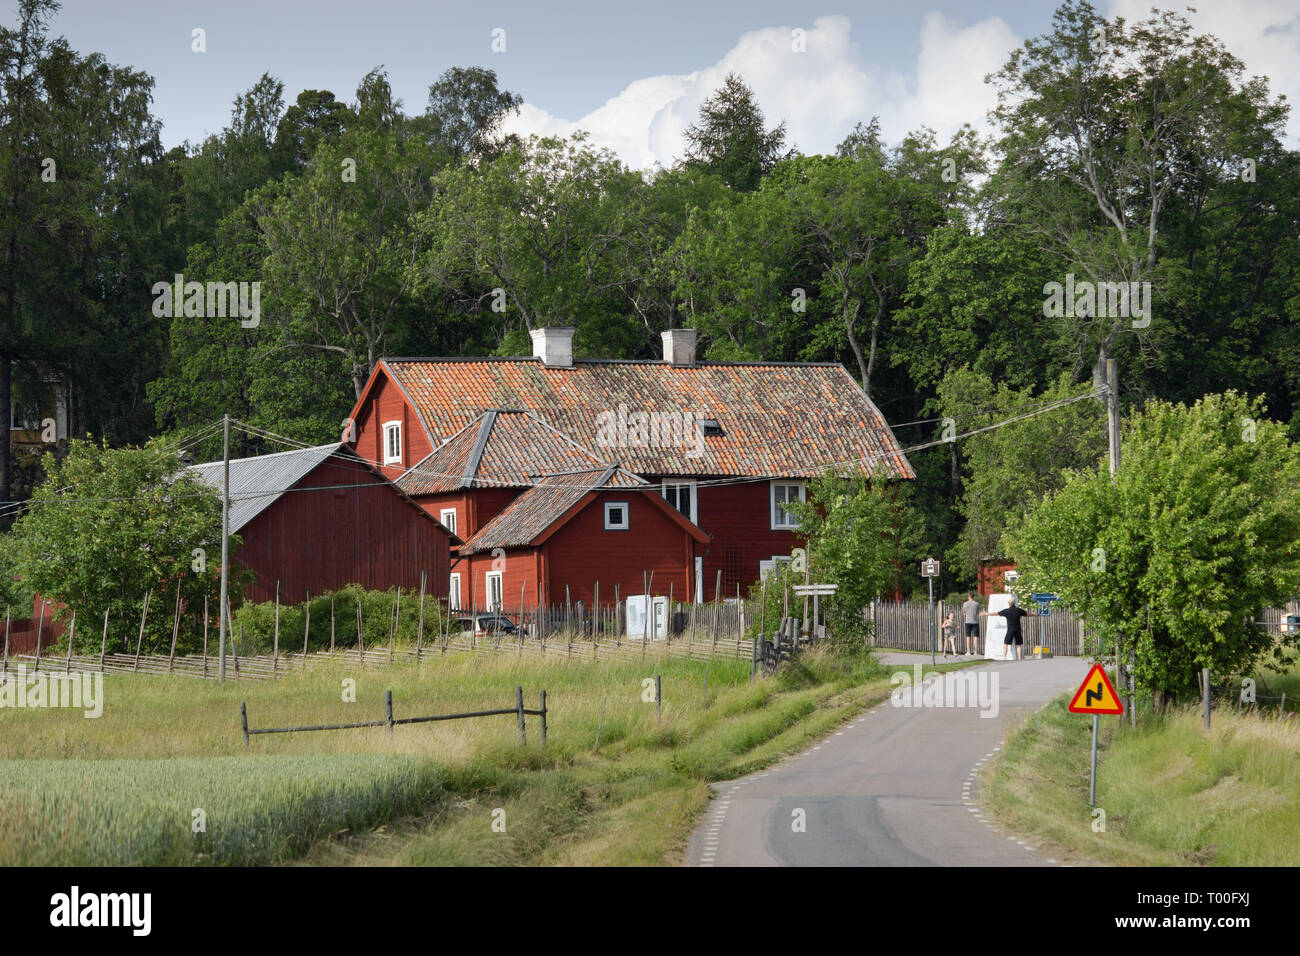 Carl Linnaeus estate (Hammarby village) opens to visitors in the summer. An English interpreter service is on request for his estate's walk. Sweden Stock Photo